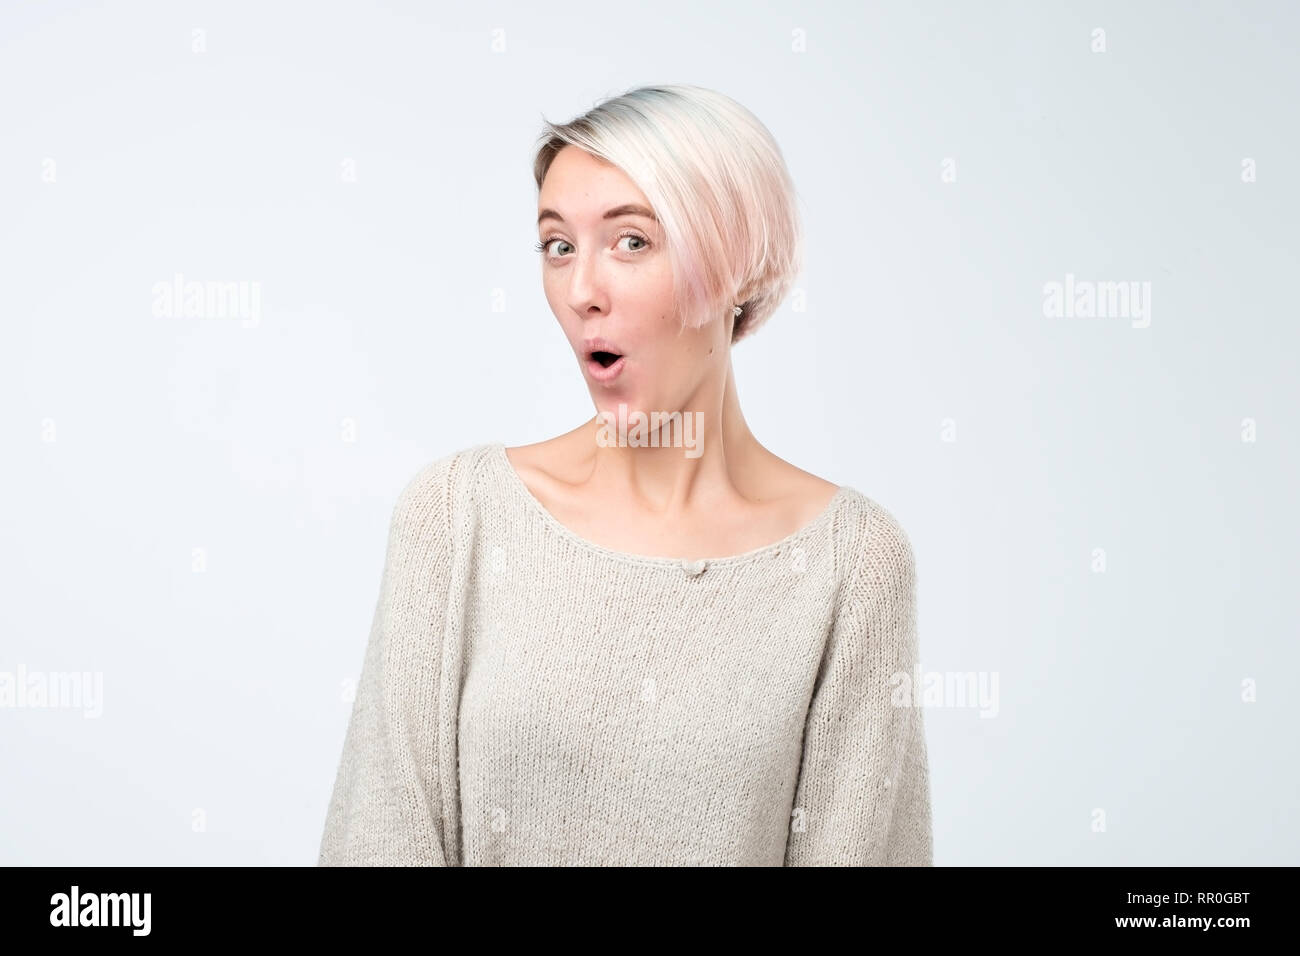 Oh my God concept. Funny european woman with dyed hair and freckles opening mouth widely and popping eyes out in surprise, shocked with some unexpecte Stock Photo